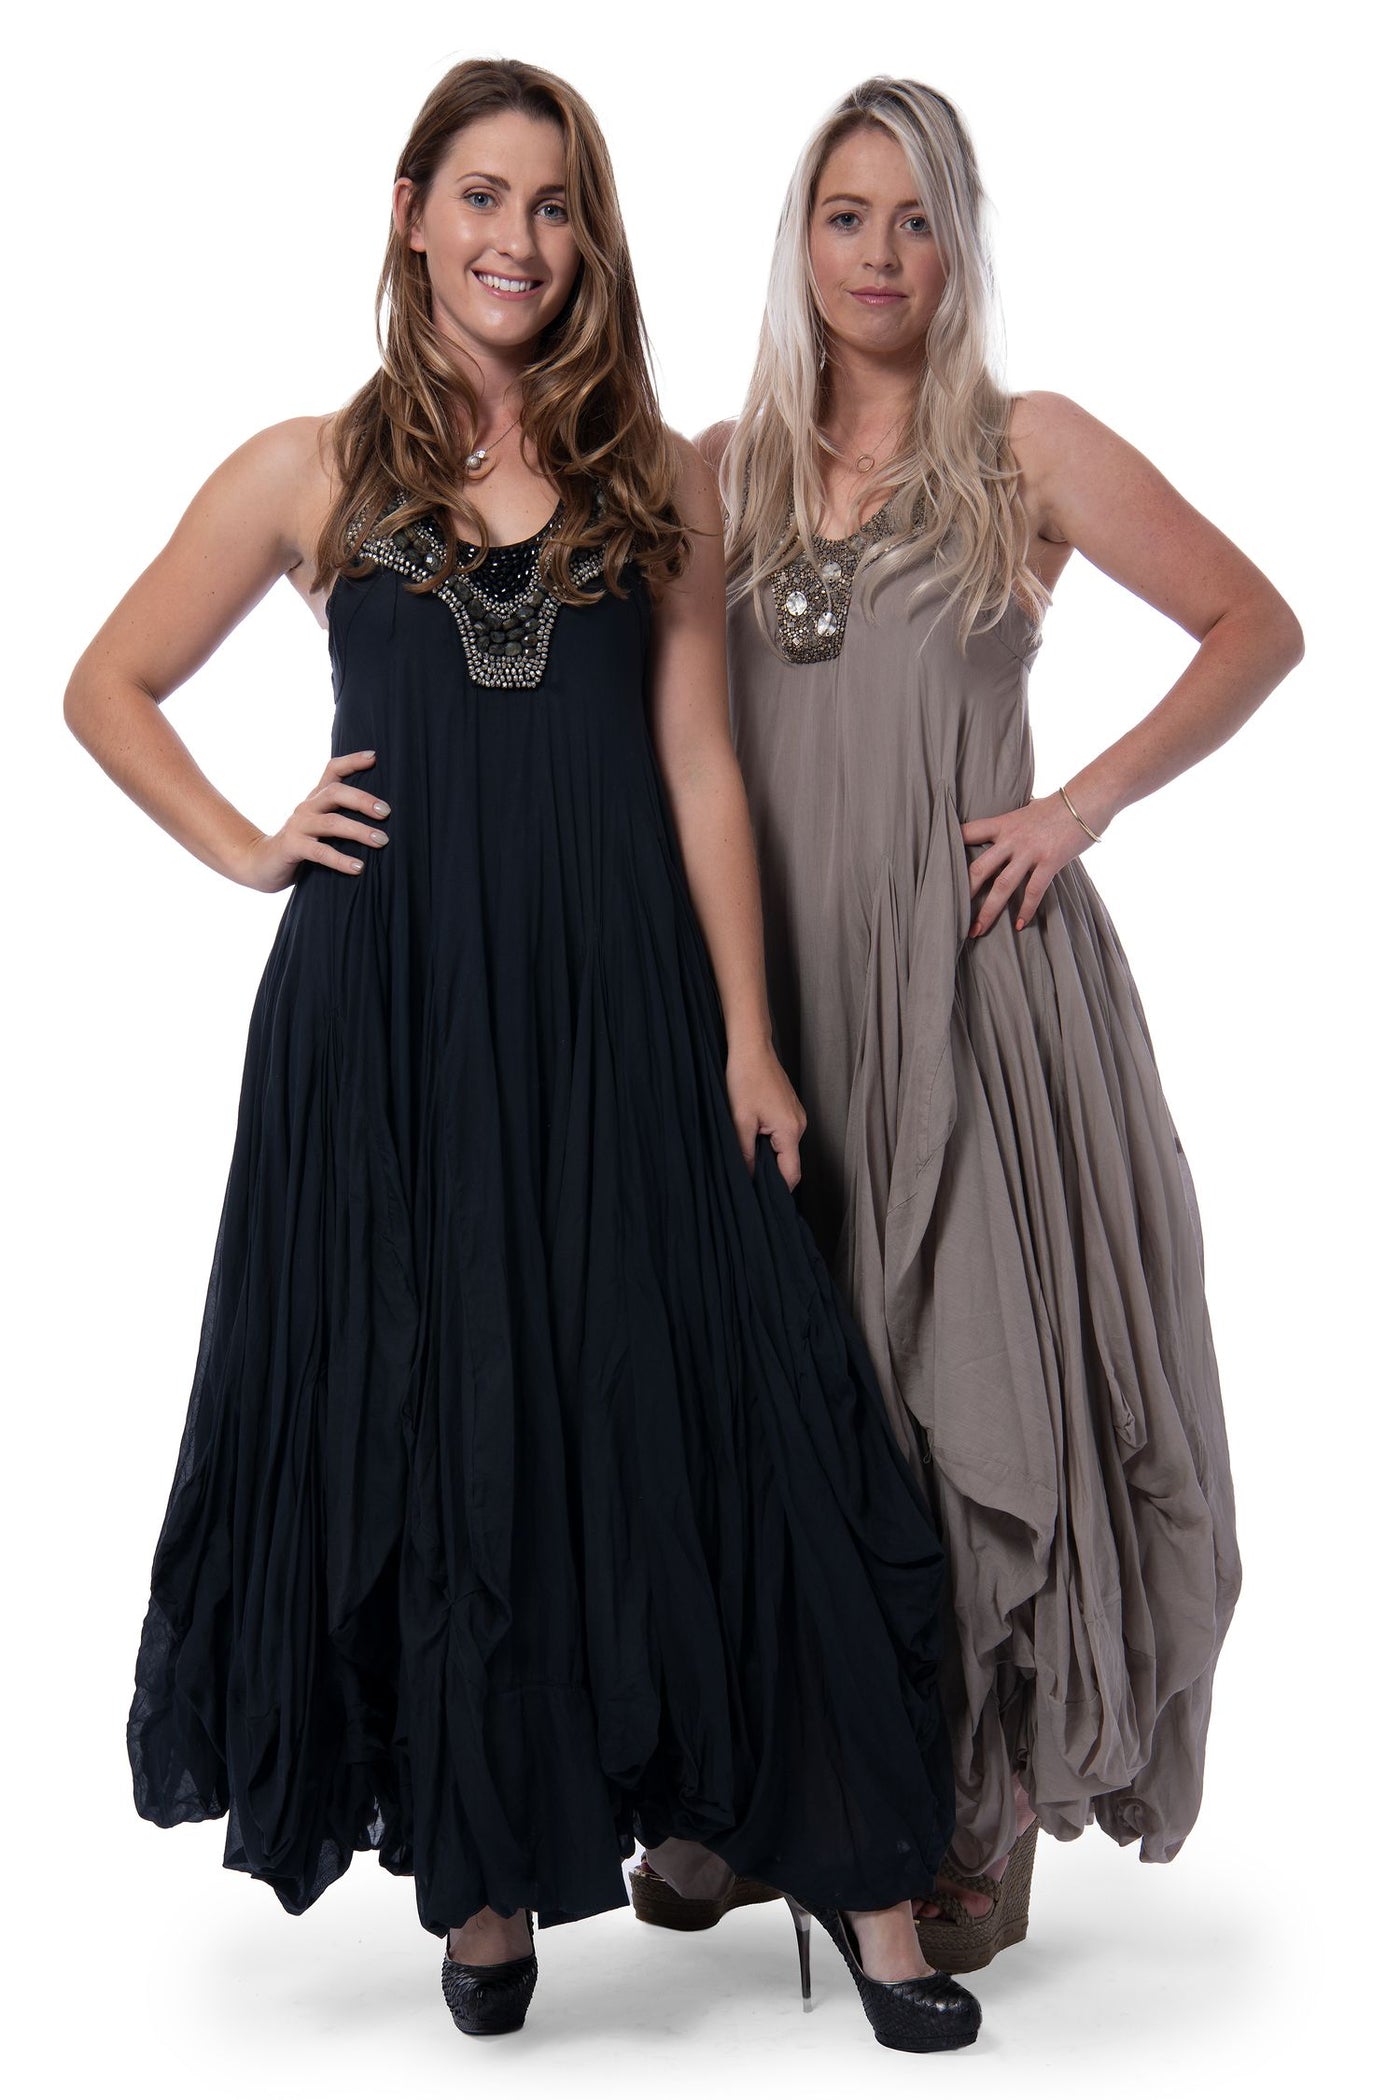 All Saints long maxi dress halter neck with beading details on collar